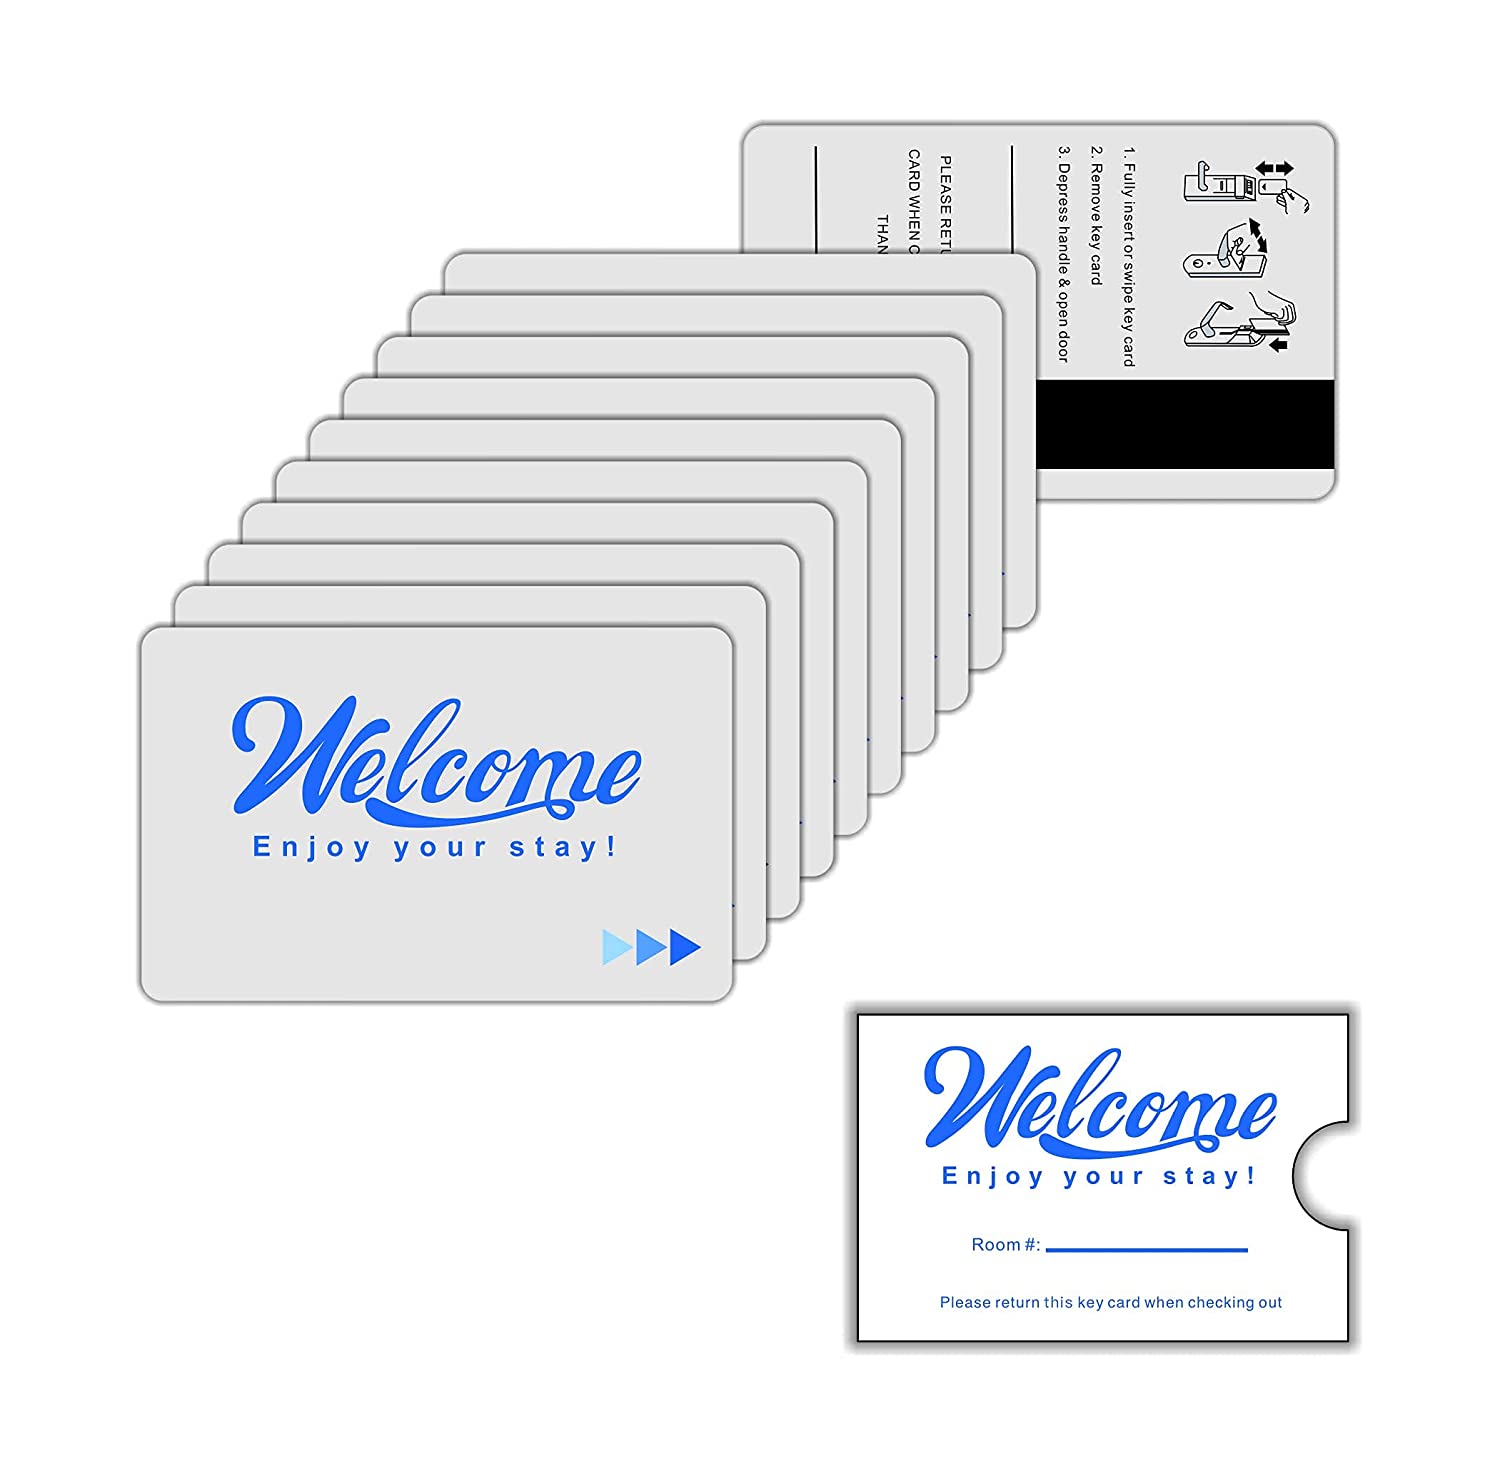 Gialer welcome enjoy your stay Hotel & Motel  magnetic key cards key card with envelopes sleeve